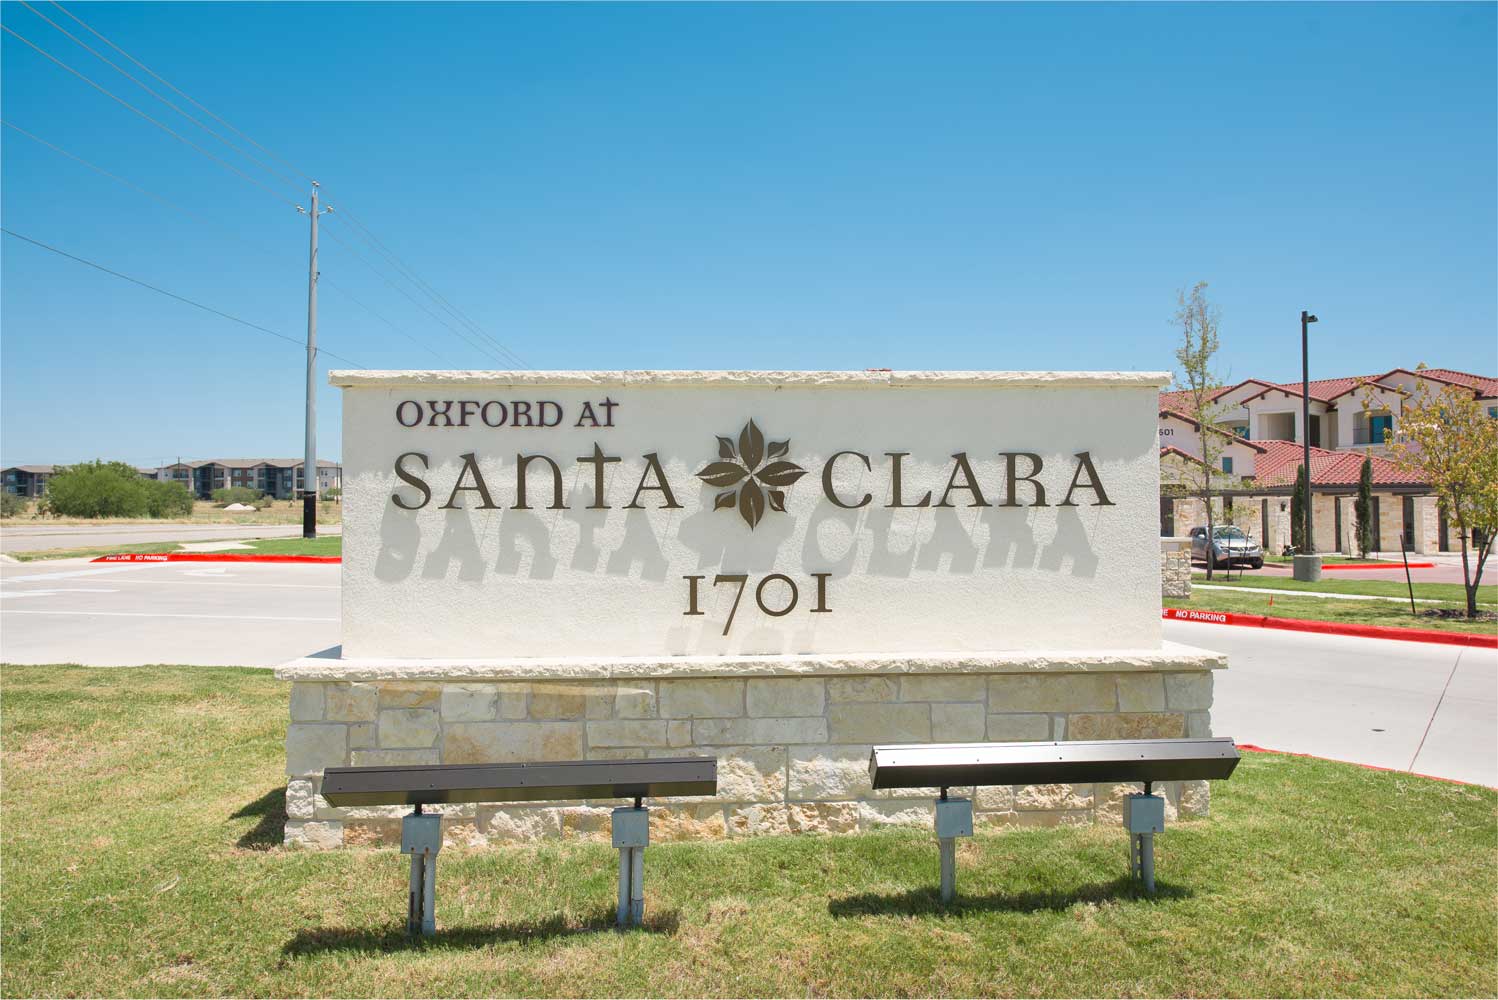 Welcome Signage at Oxford at Santa Clara Apartments in Pflugerville, Texas